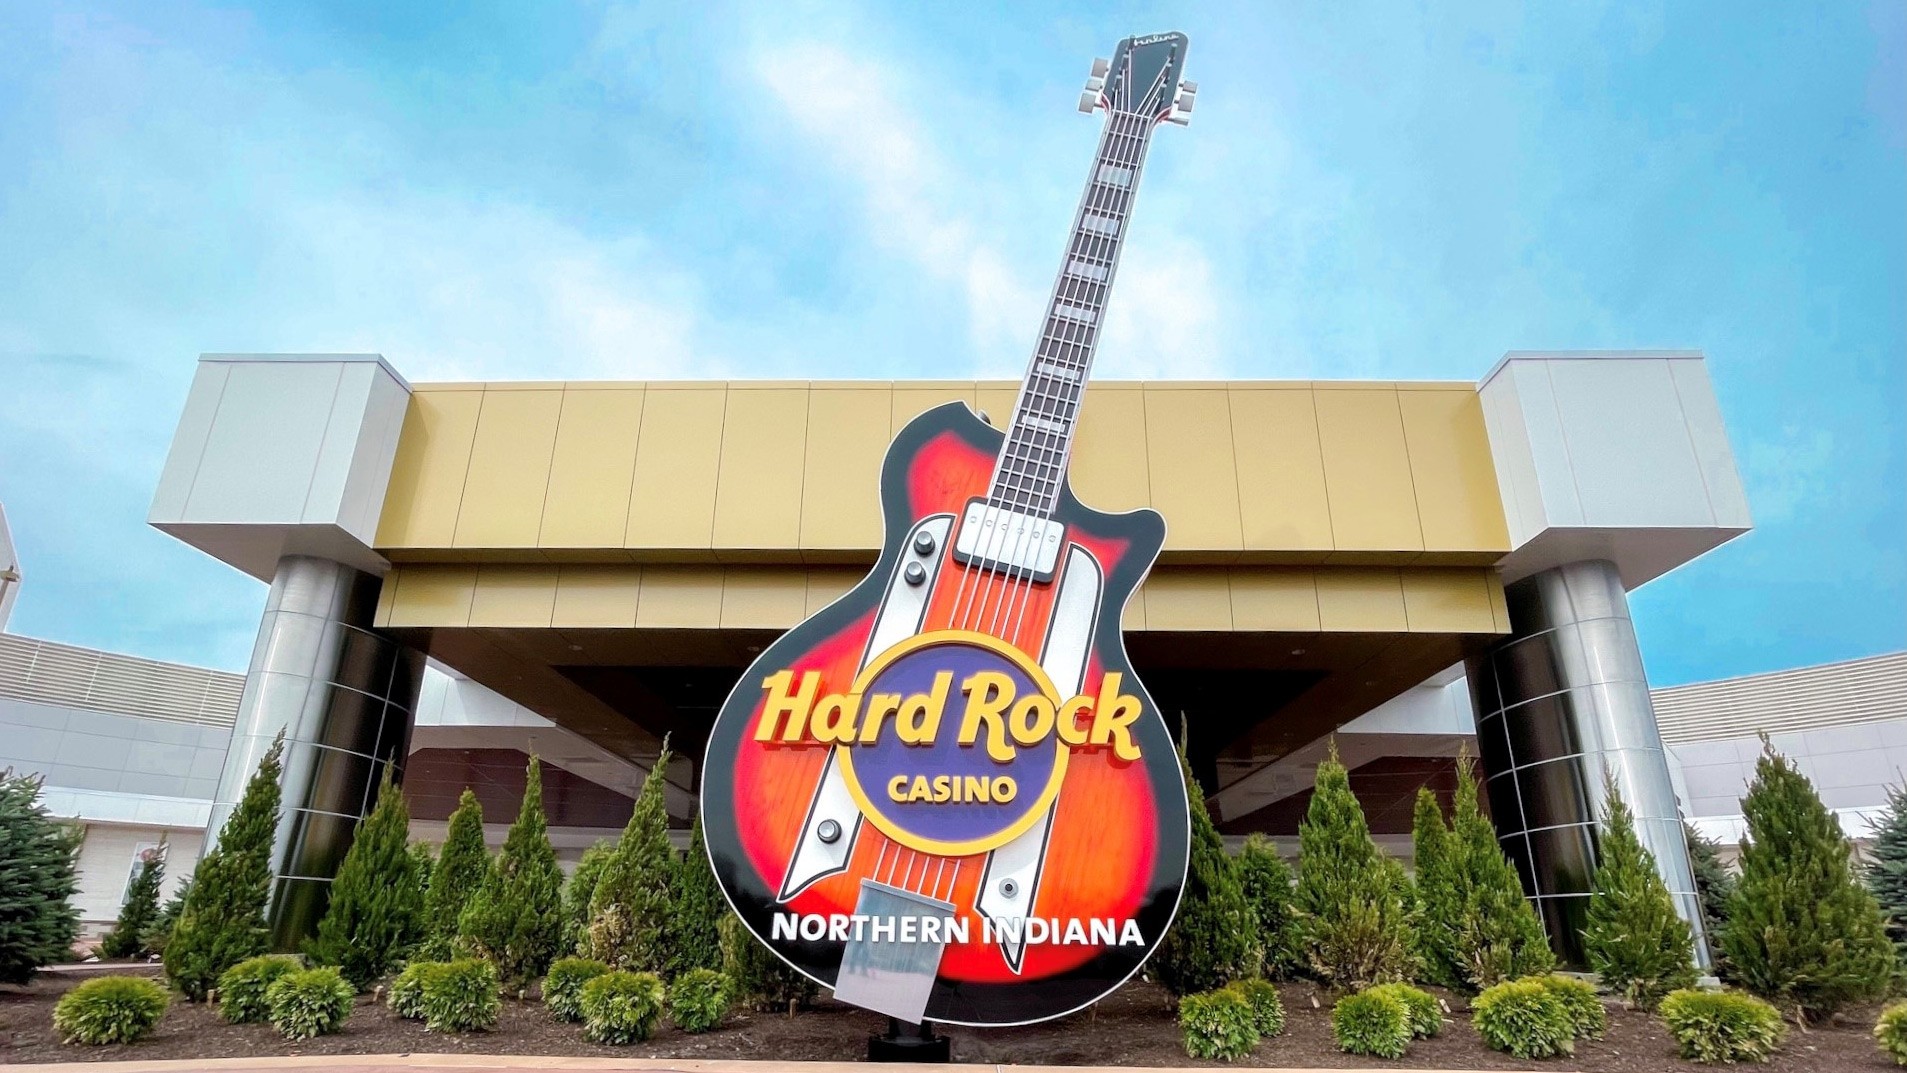 Indiana casinos see $221.7M in revenue in April, led by Hard Rock for 7th month in a row